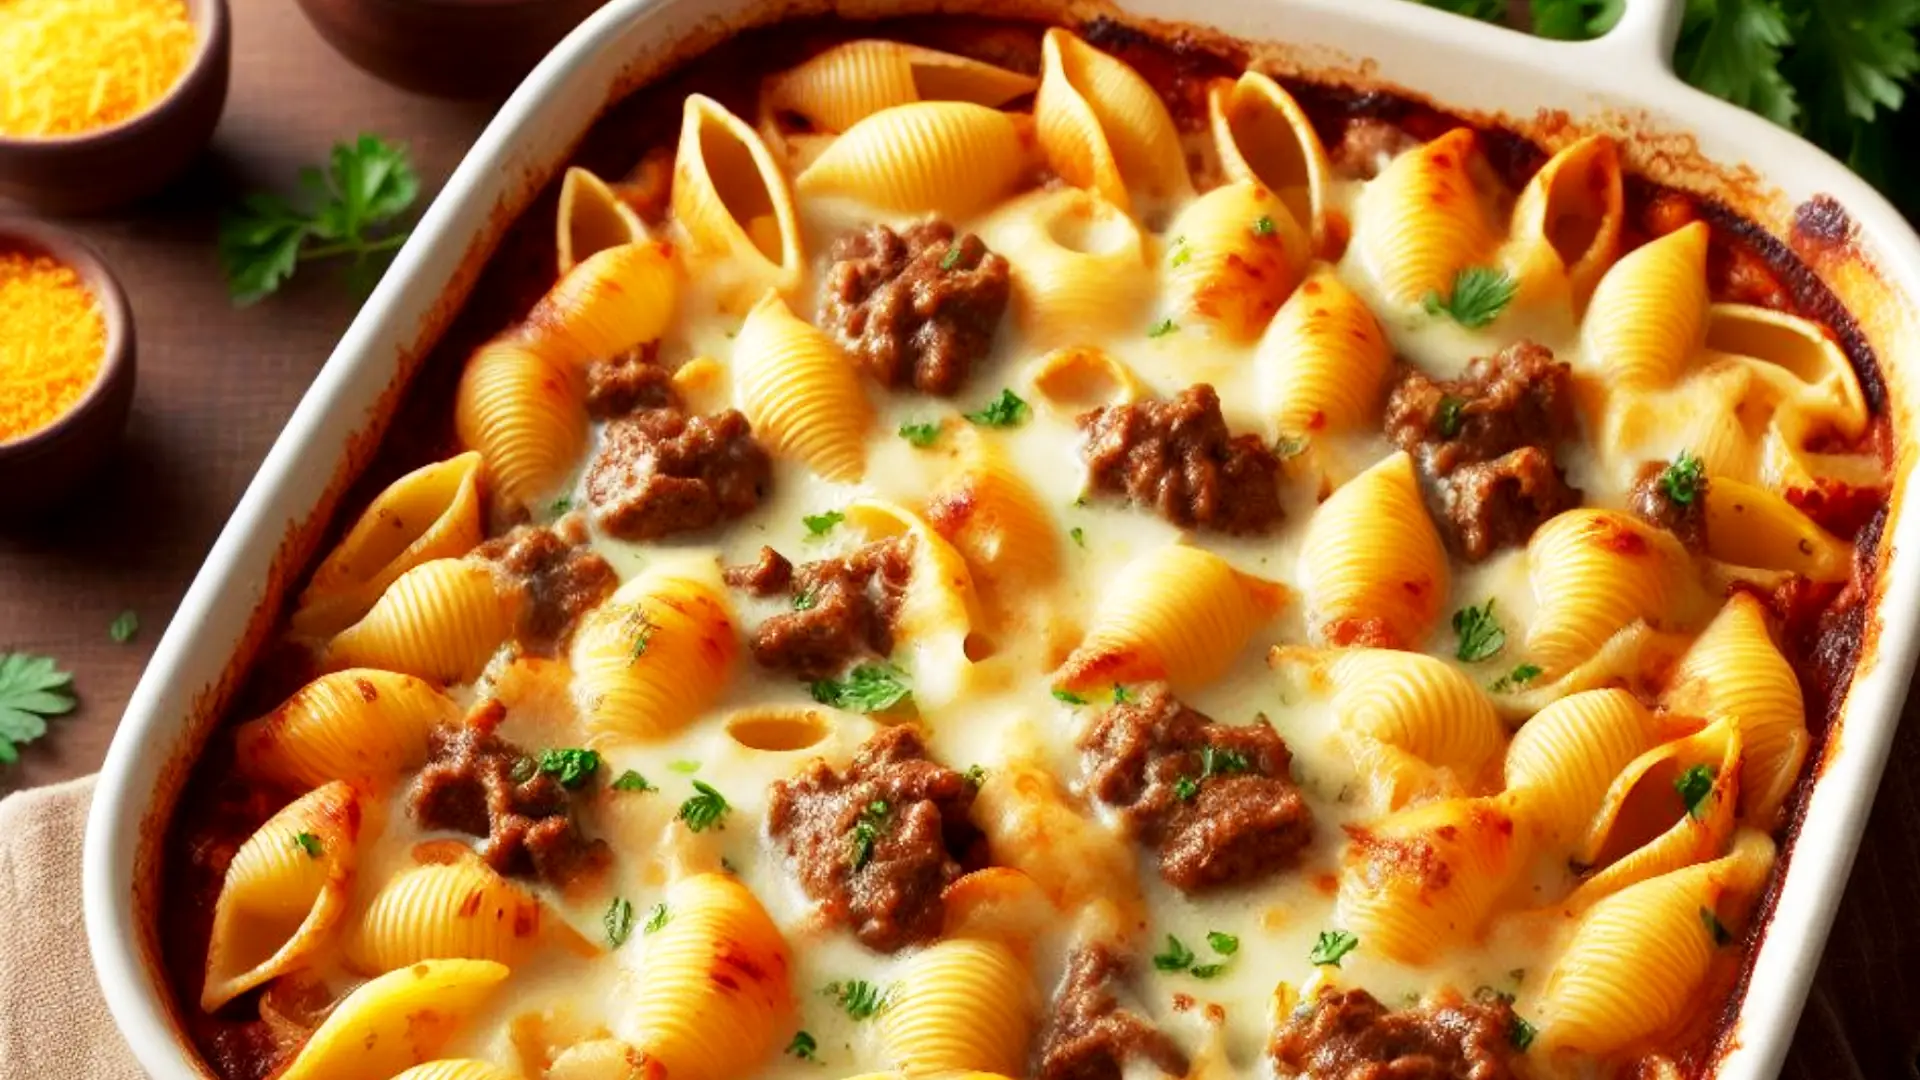 Cheesy Beef Pasta Casserole with Leftover Beef Stew 4.5 (8)